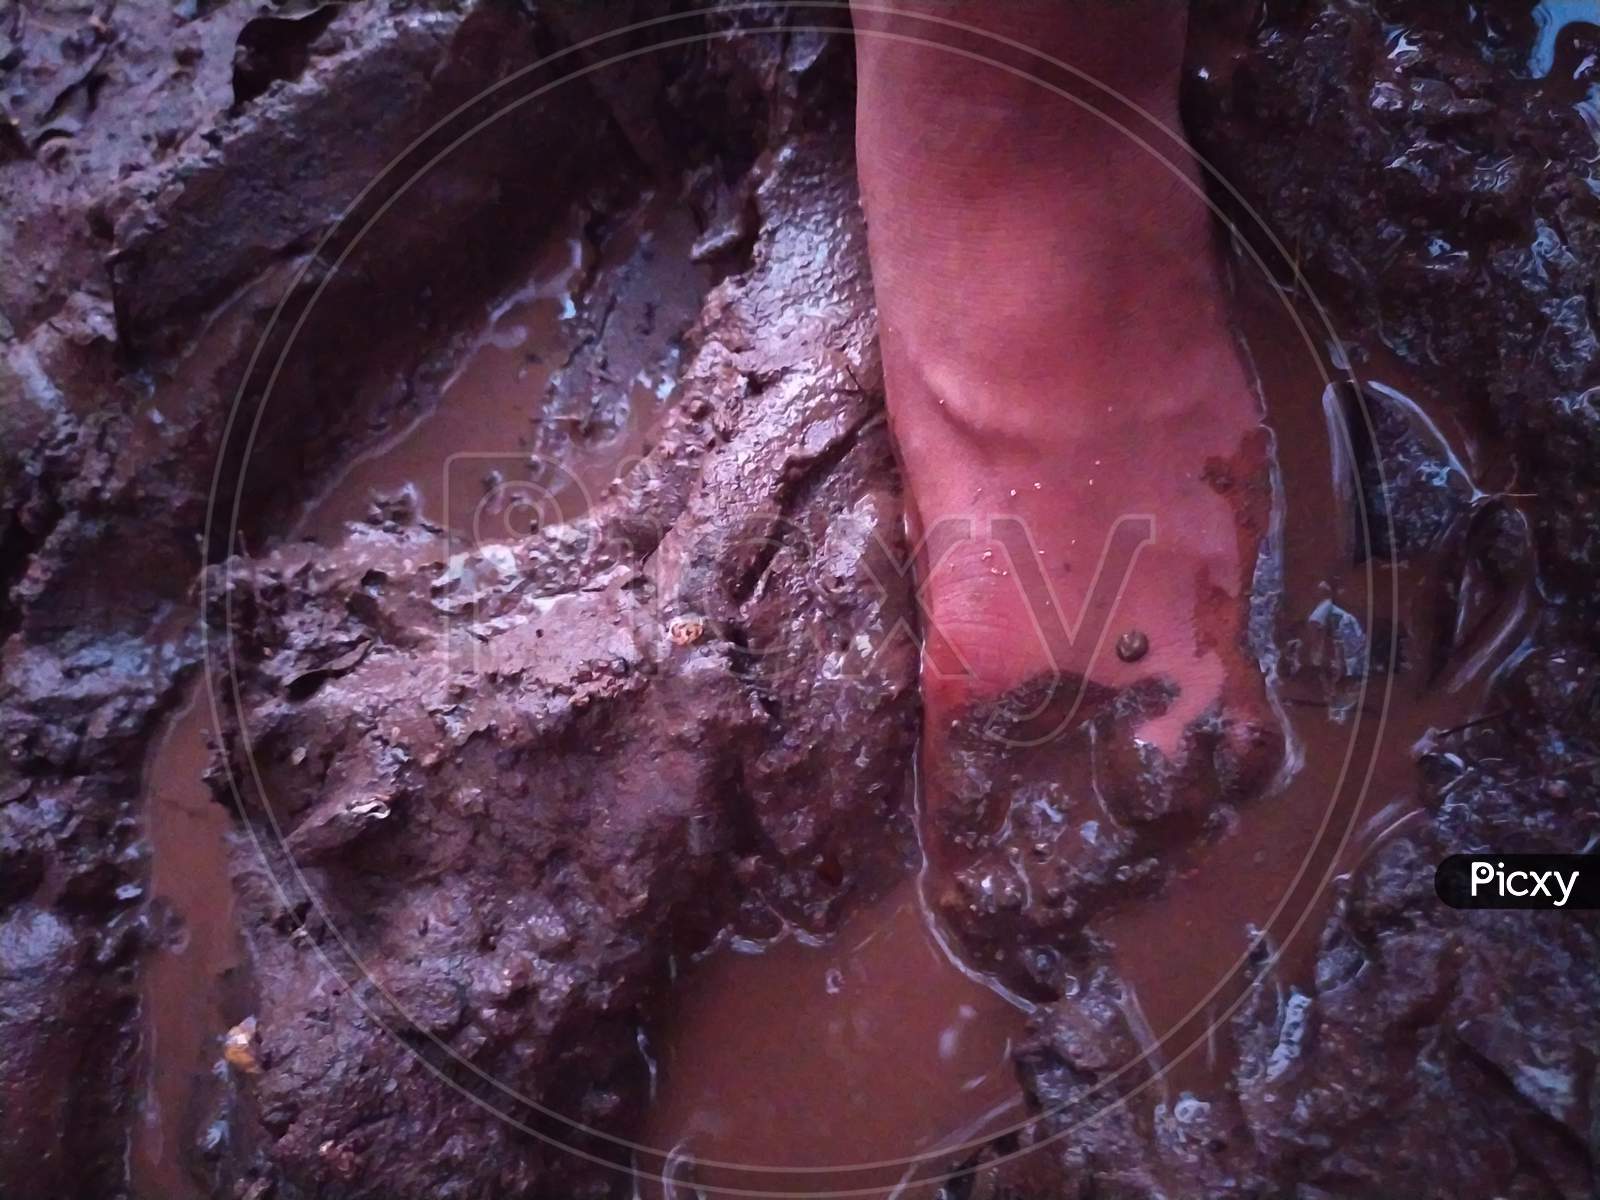 Single bare feet in muddy earth with footprint